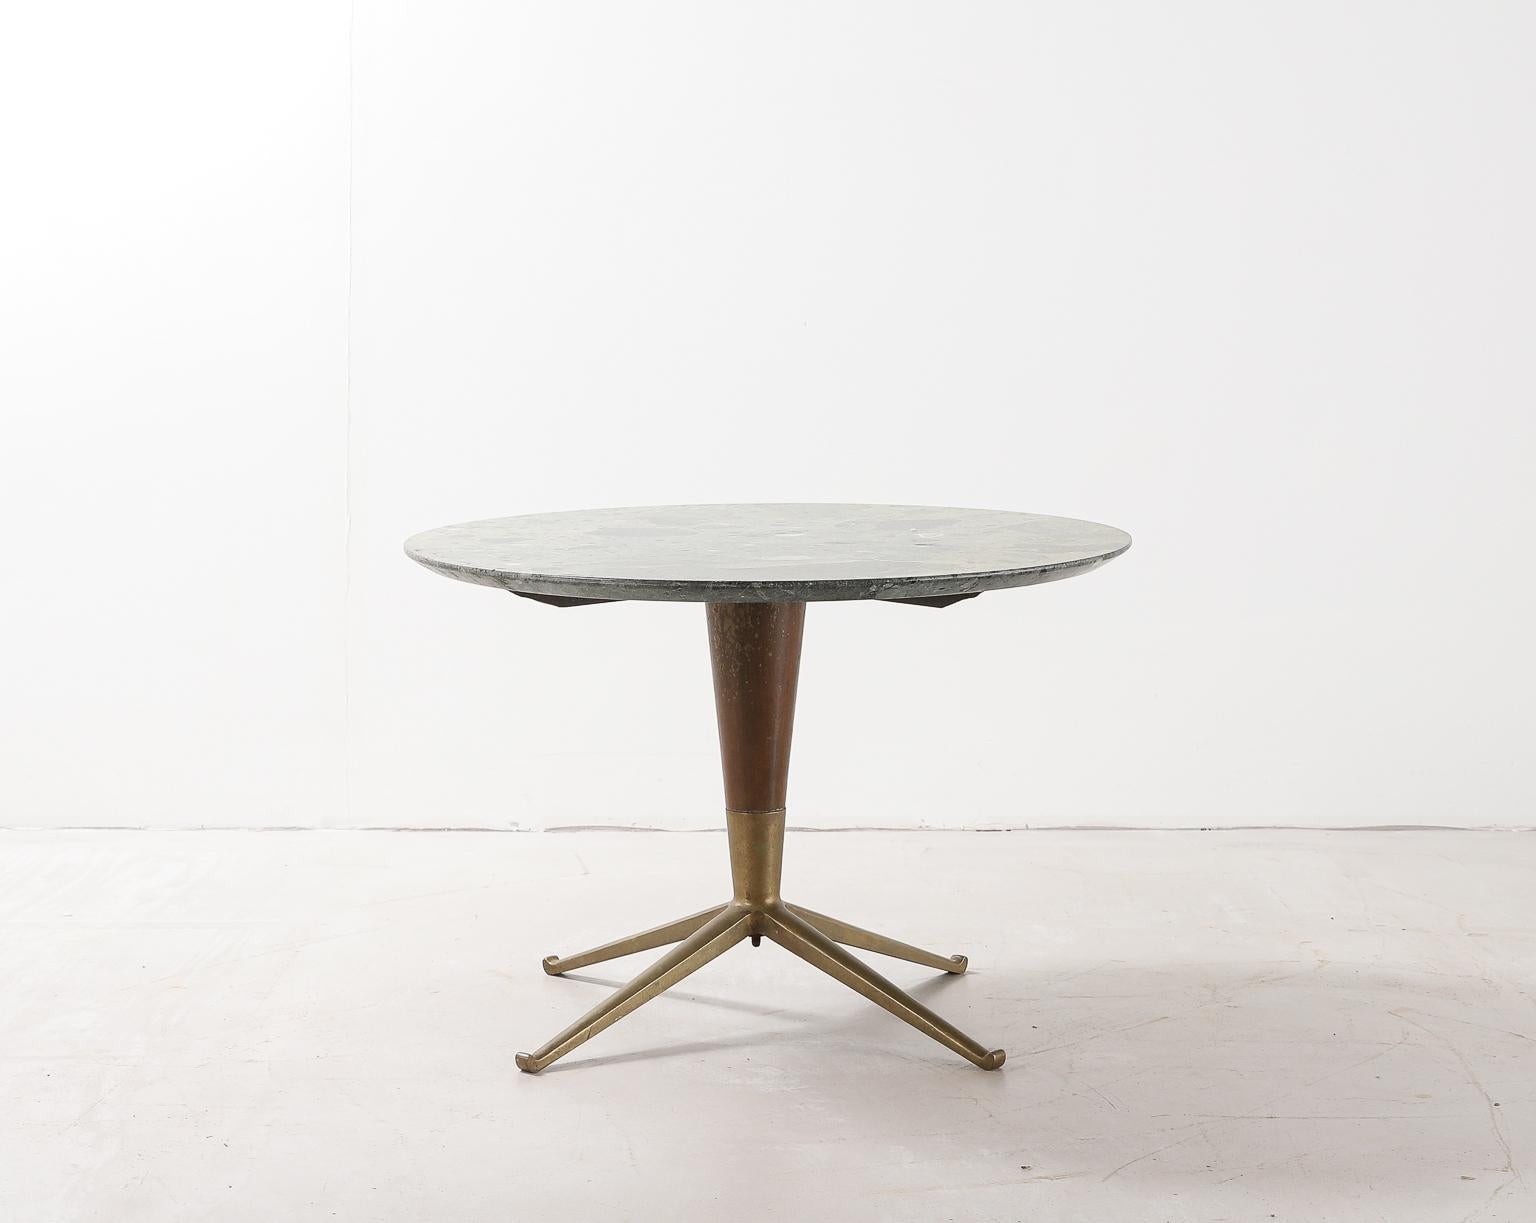 1950s Italian pedestal table. Green marble tabletop, brass feet and wood stem attributed to Melchiorre Bega.